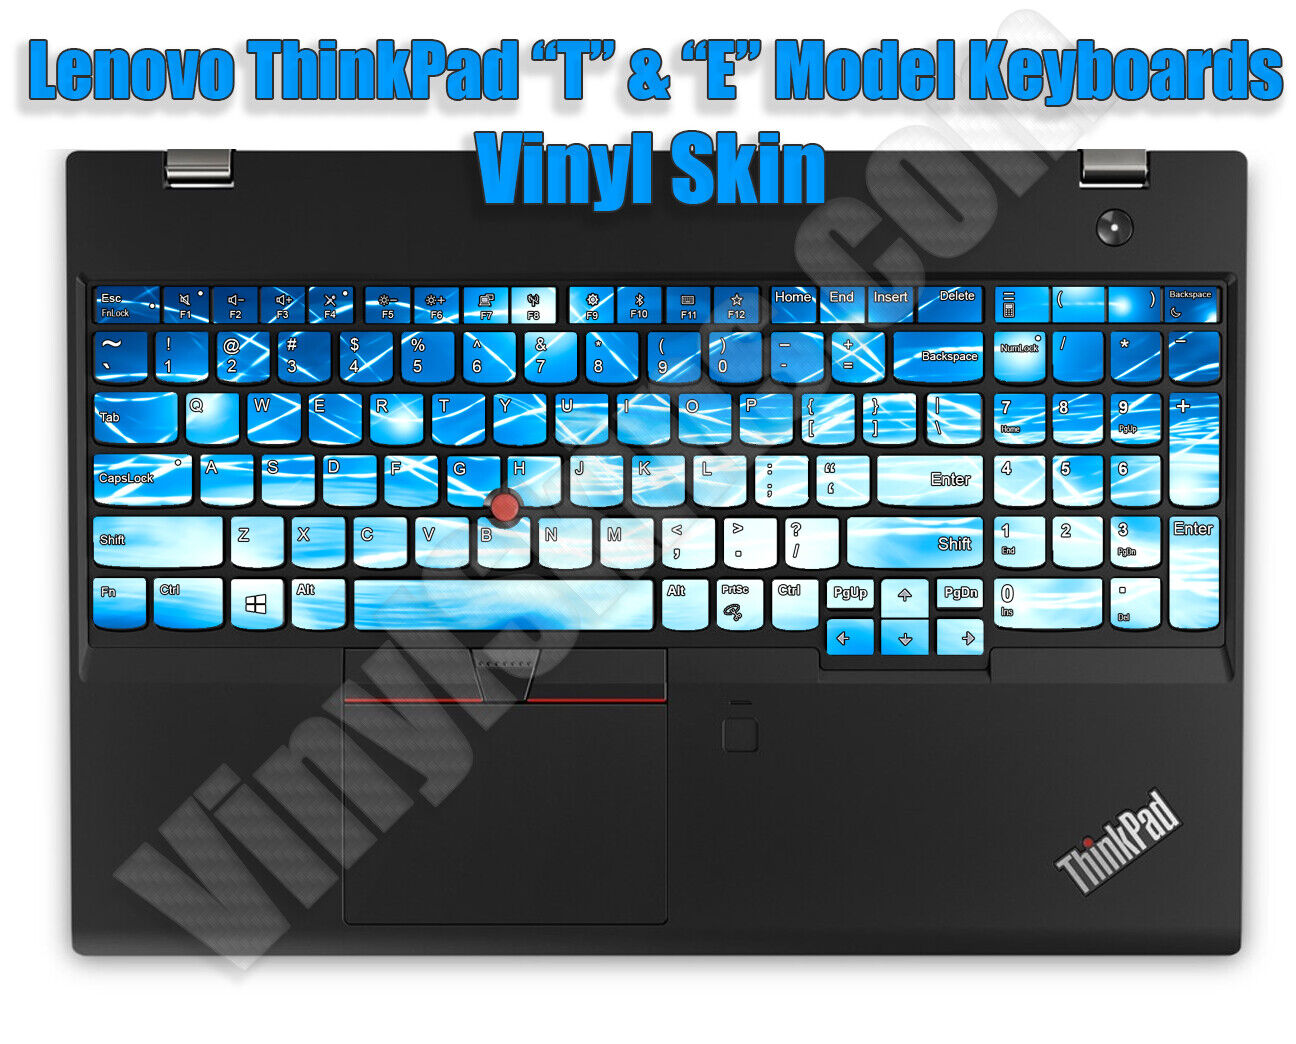 Choose Any Vinyl Skin / Decal Design for the Lenovo ThinkPad Laptop Keyboards